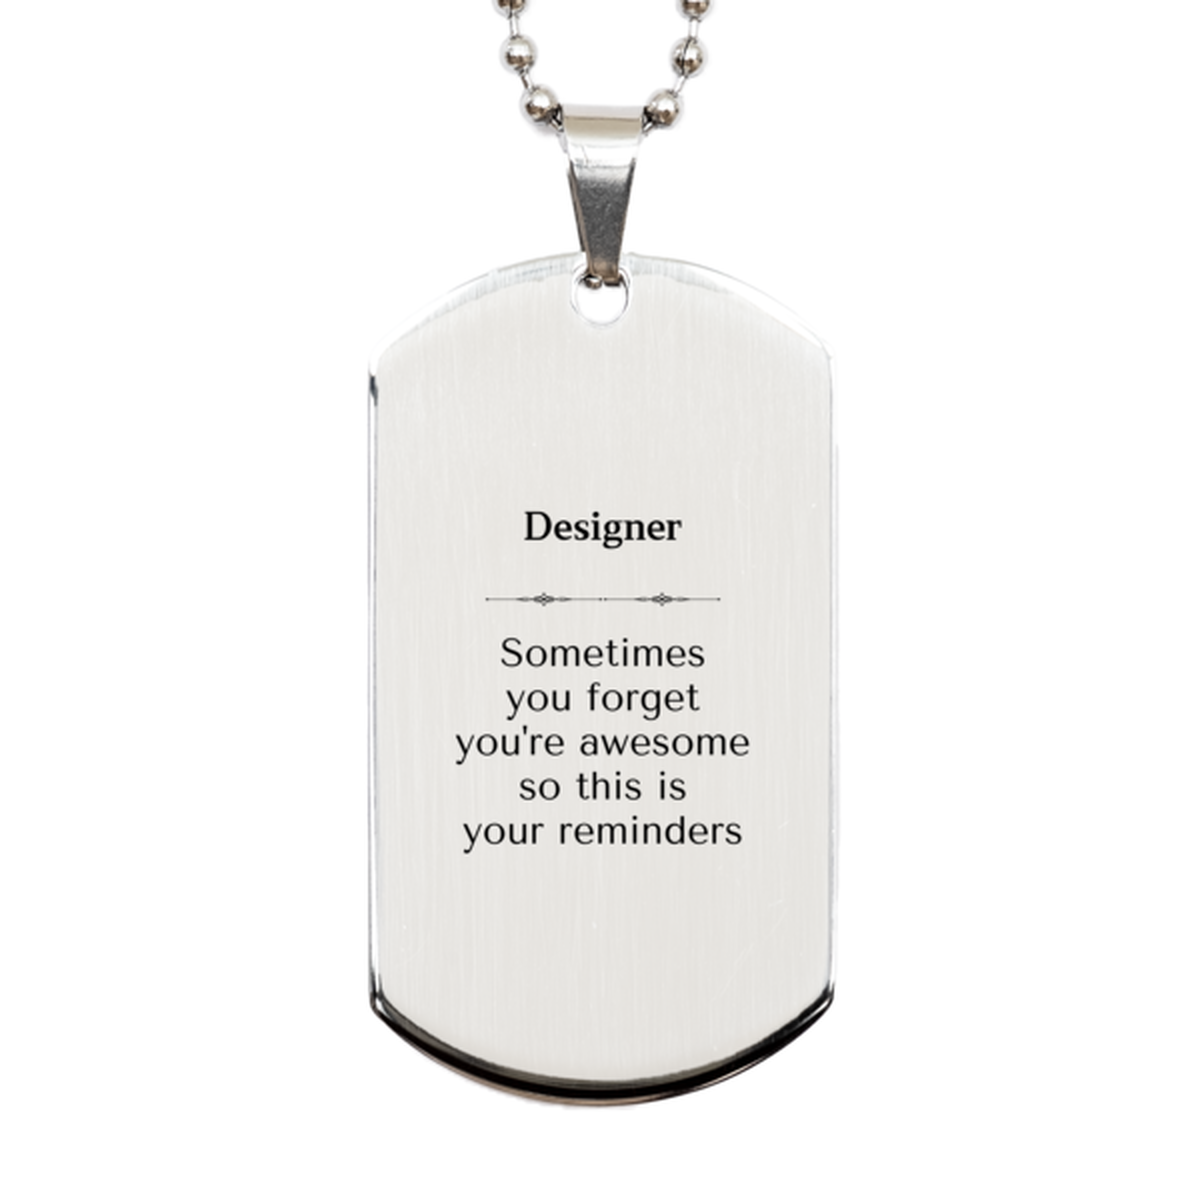 Sentimental Designer Silver Dog Tag, Designer Sometimes you forget you're awesome so this is your reminders, Graduation Christmas Birthday Gifts for Designer, Men, Women, Coworkers